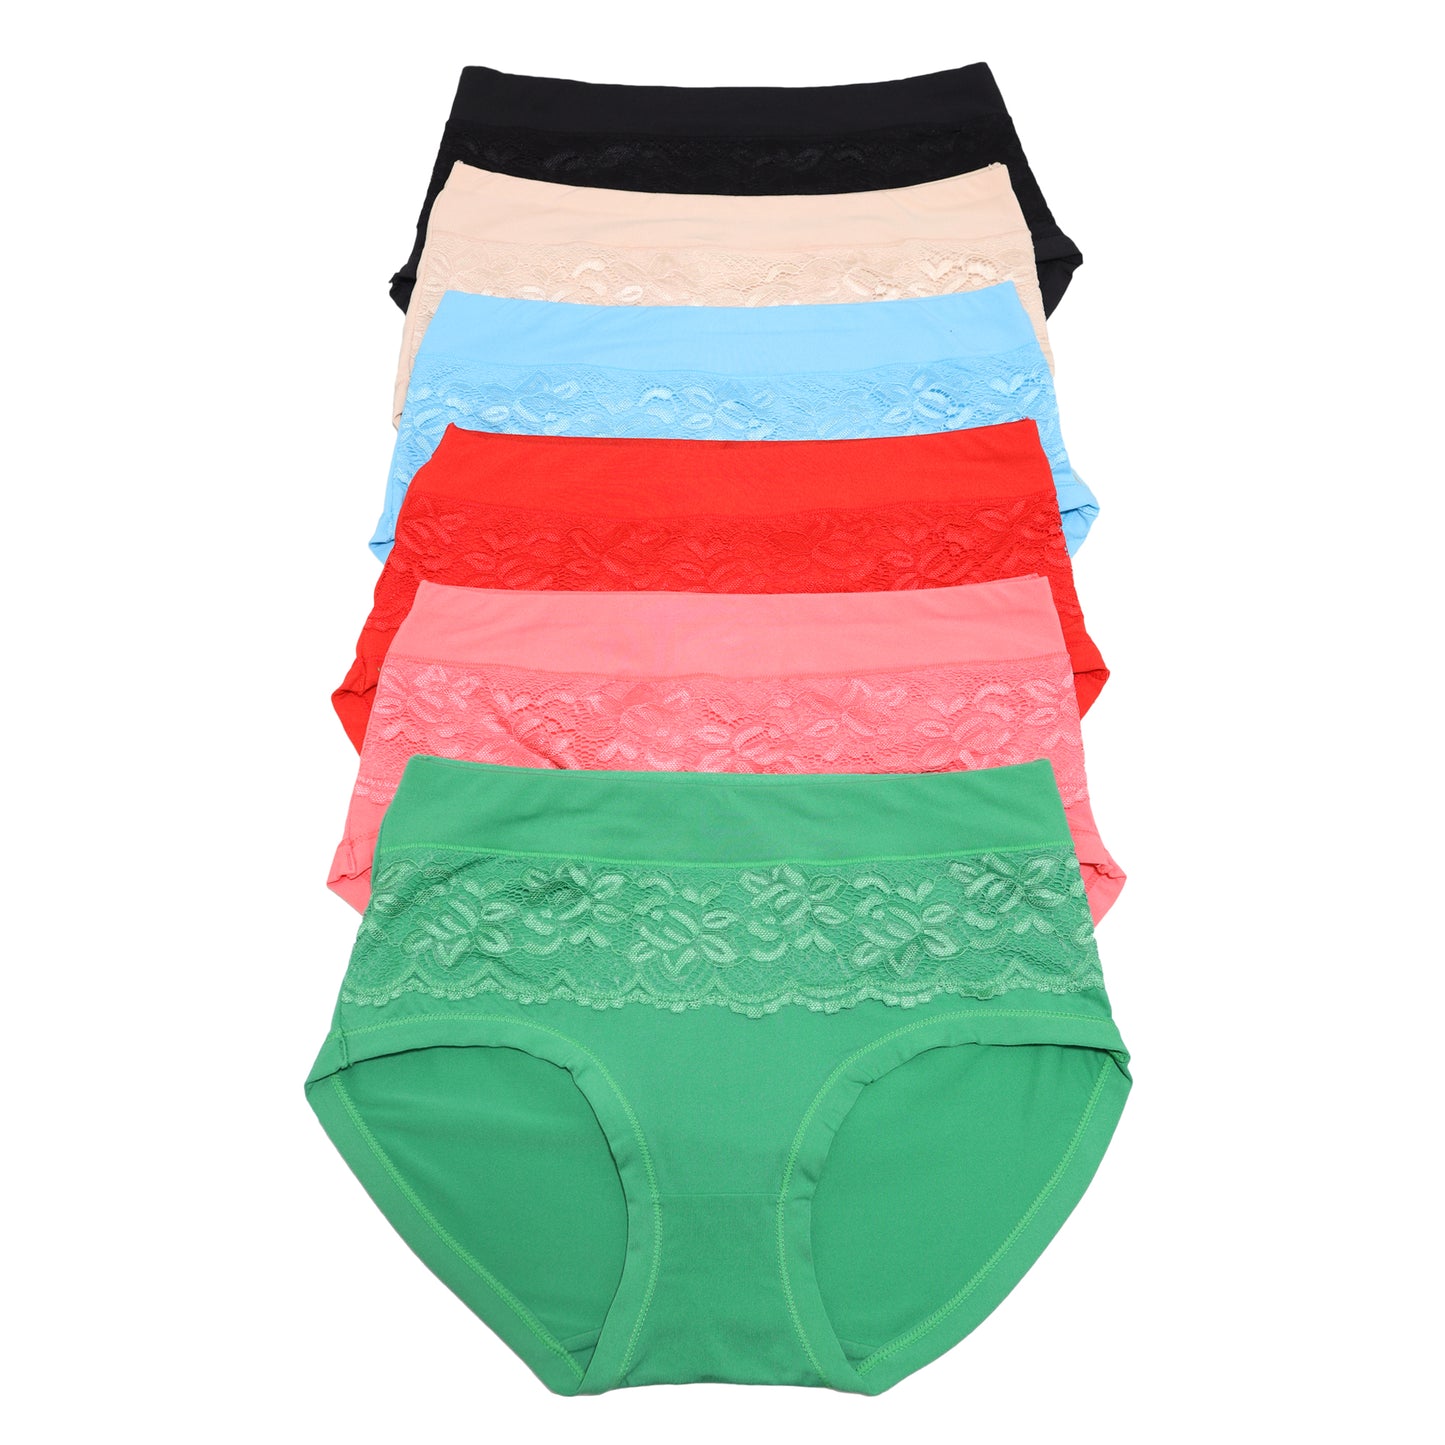 Classic Mid-Rise Briefs Panties with Lace Accent Design (6-Pack)